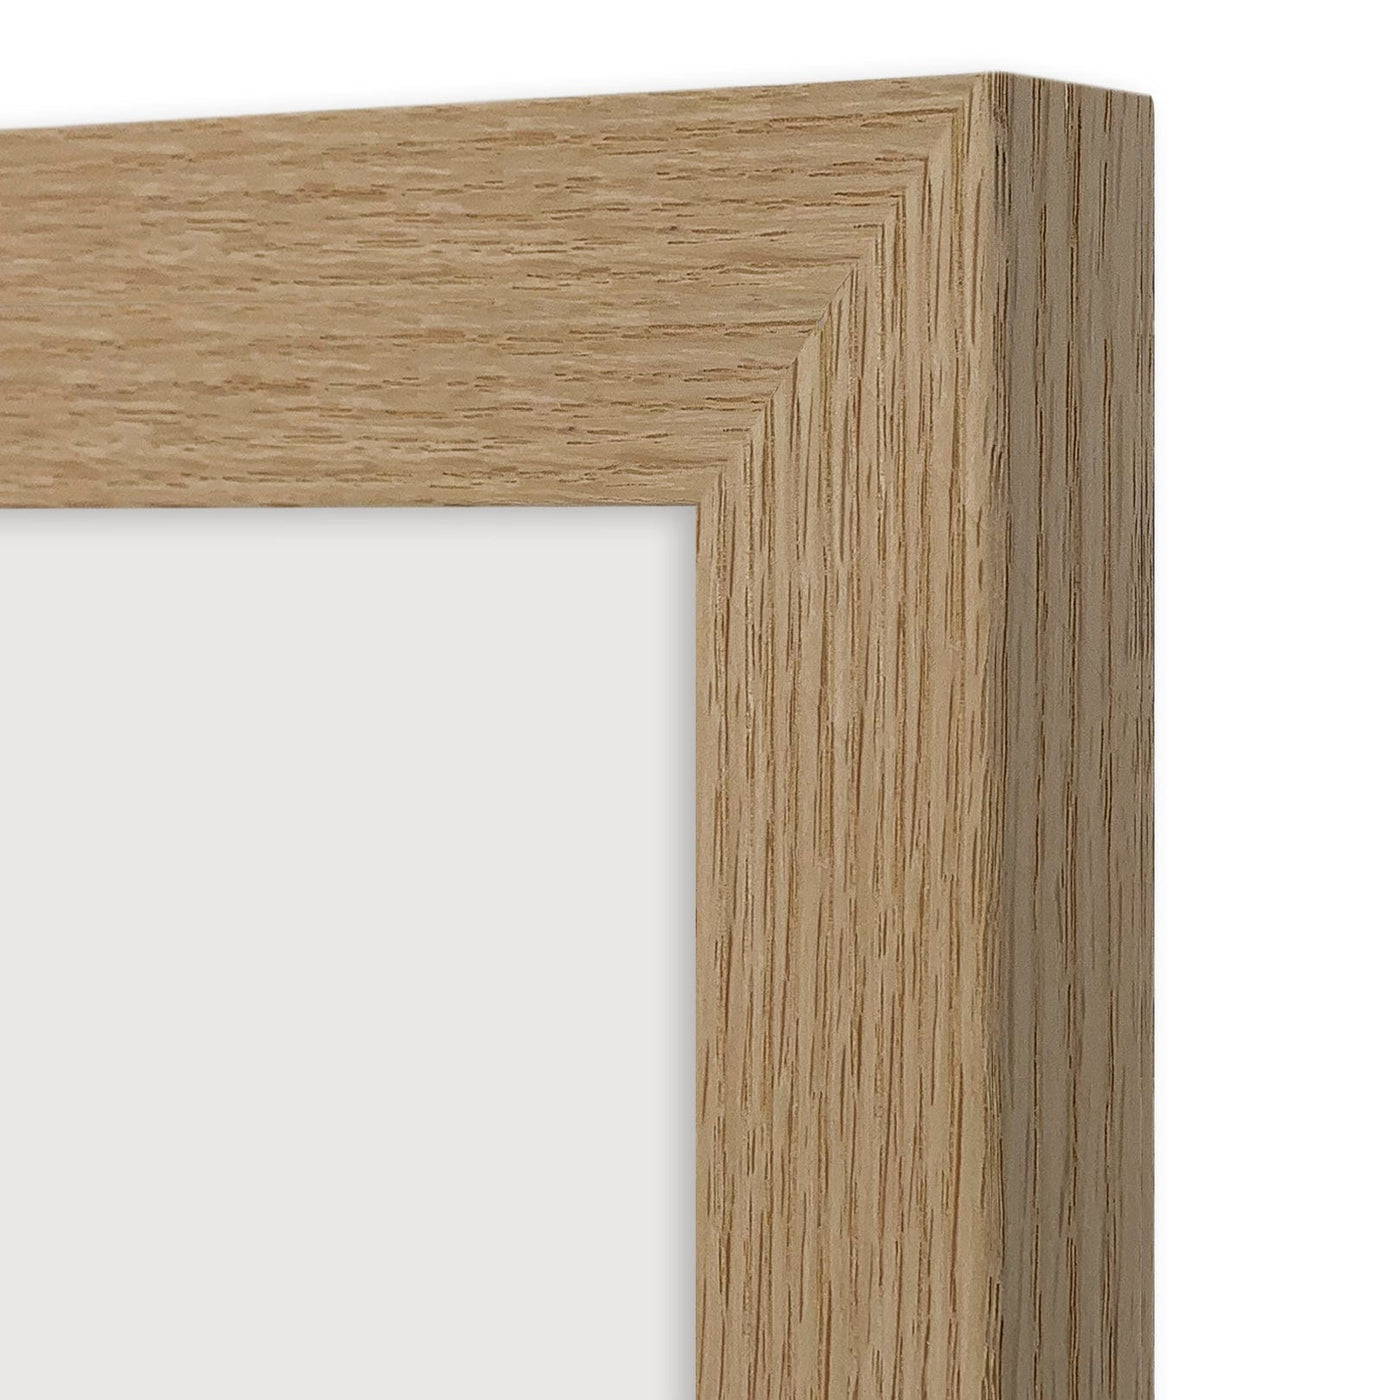 Classic Natural Oak A2 Picture Frame from our Australian Made A2 Picture Frames collection by Profile Products Australia